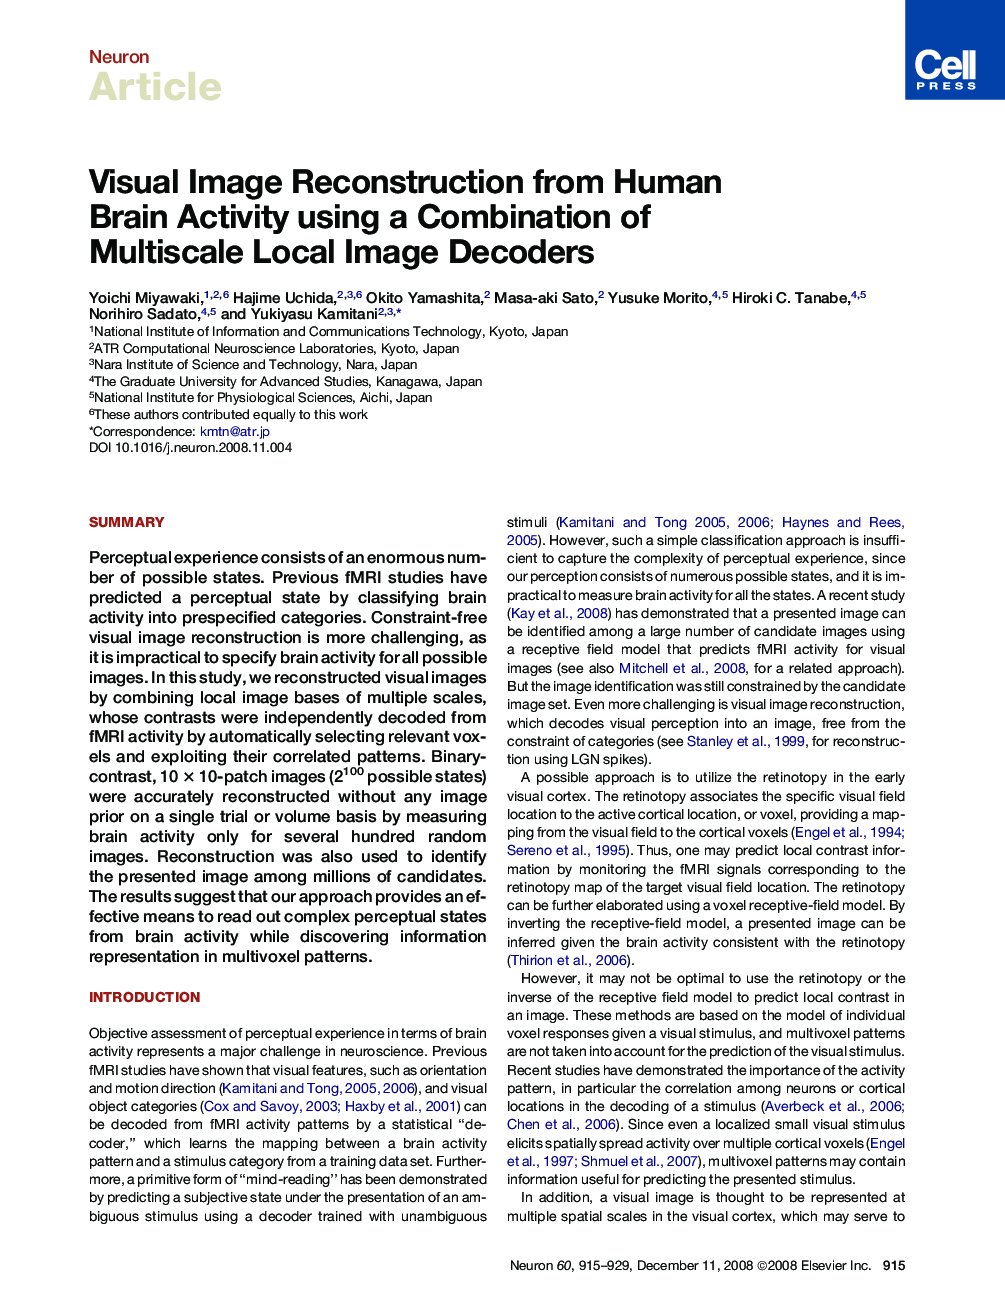 Visual Image Reconstruction from Human Brain Activity using a Combination of Multiscale Local Image Decoders